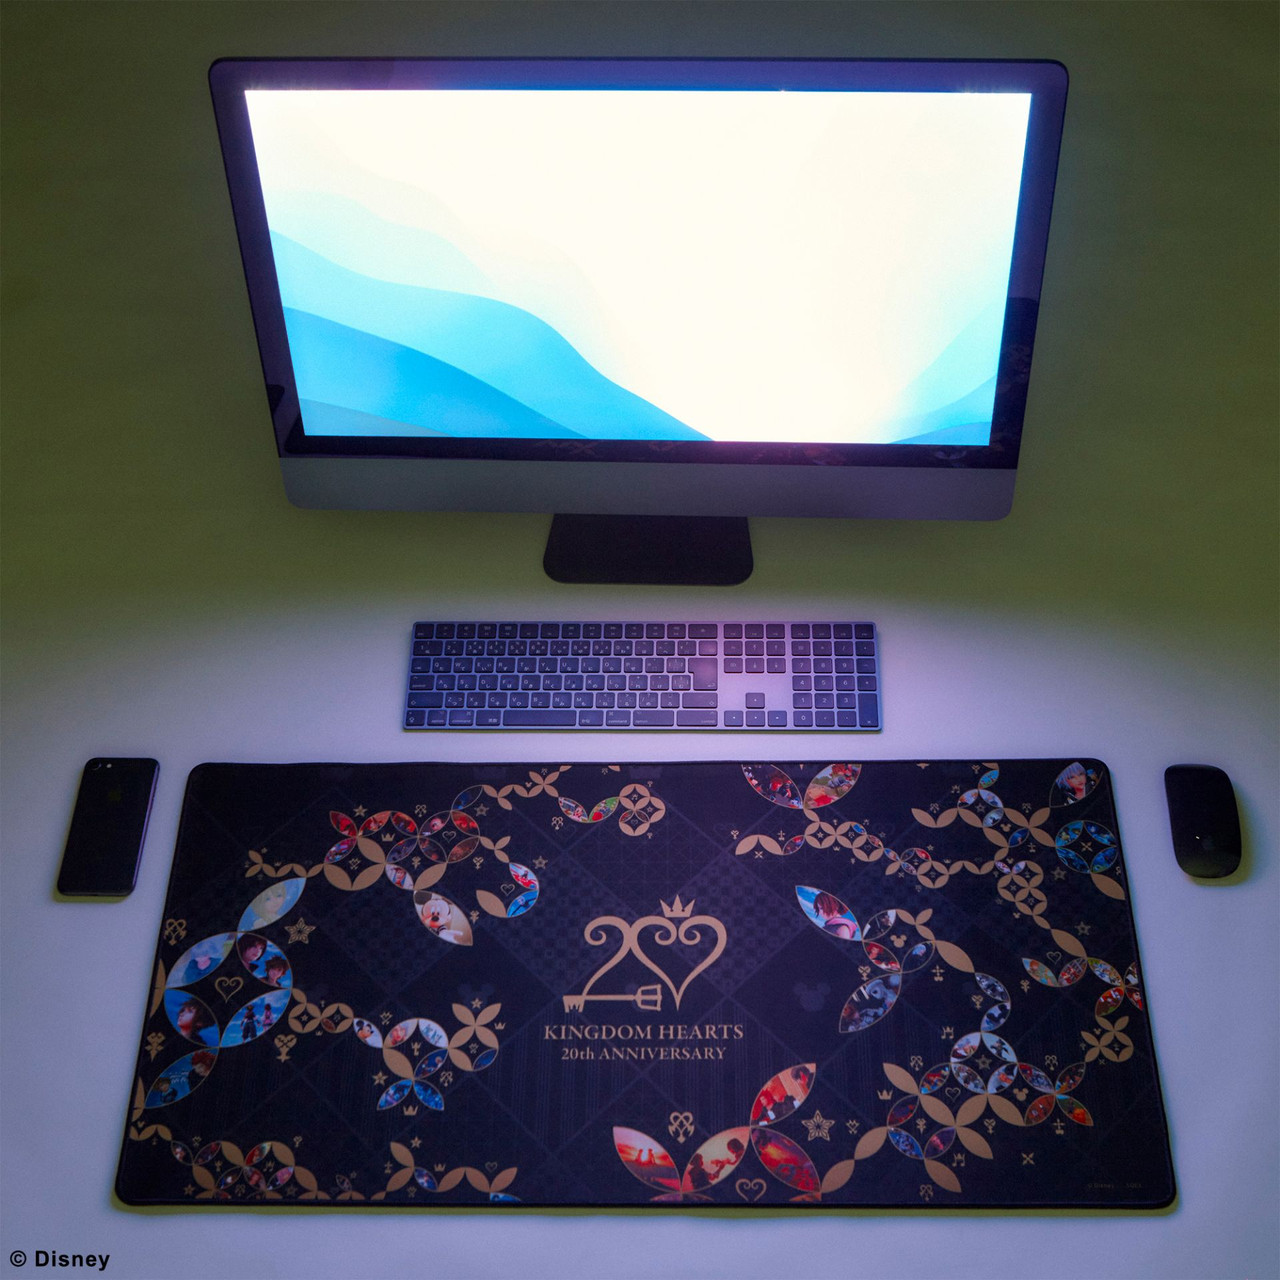 Perforering Vær stille besejret KINGDOM HEARTS / 20TH ANNIVERSARY GAMING MOUSE PAD VOL. 1 | SQUARE ENIX  Store